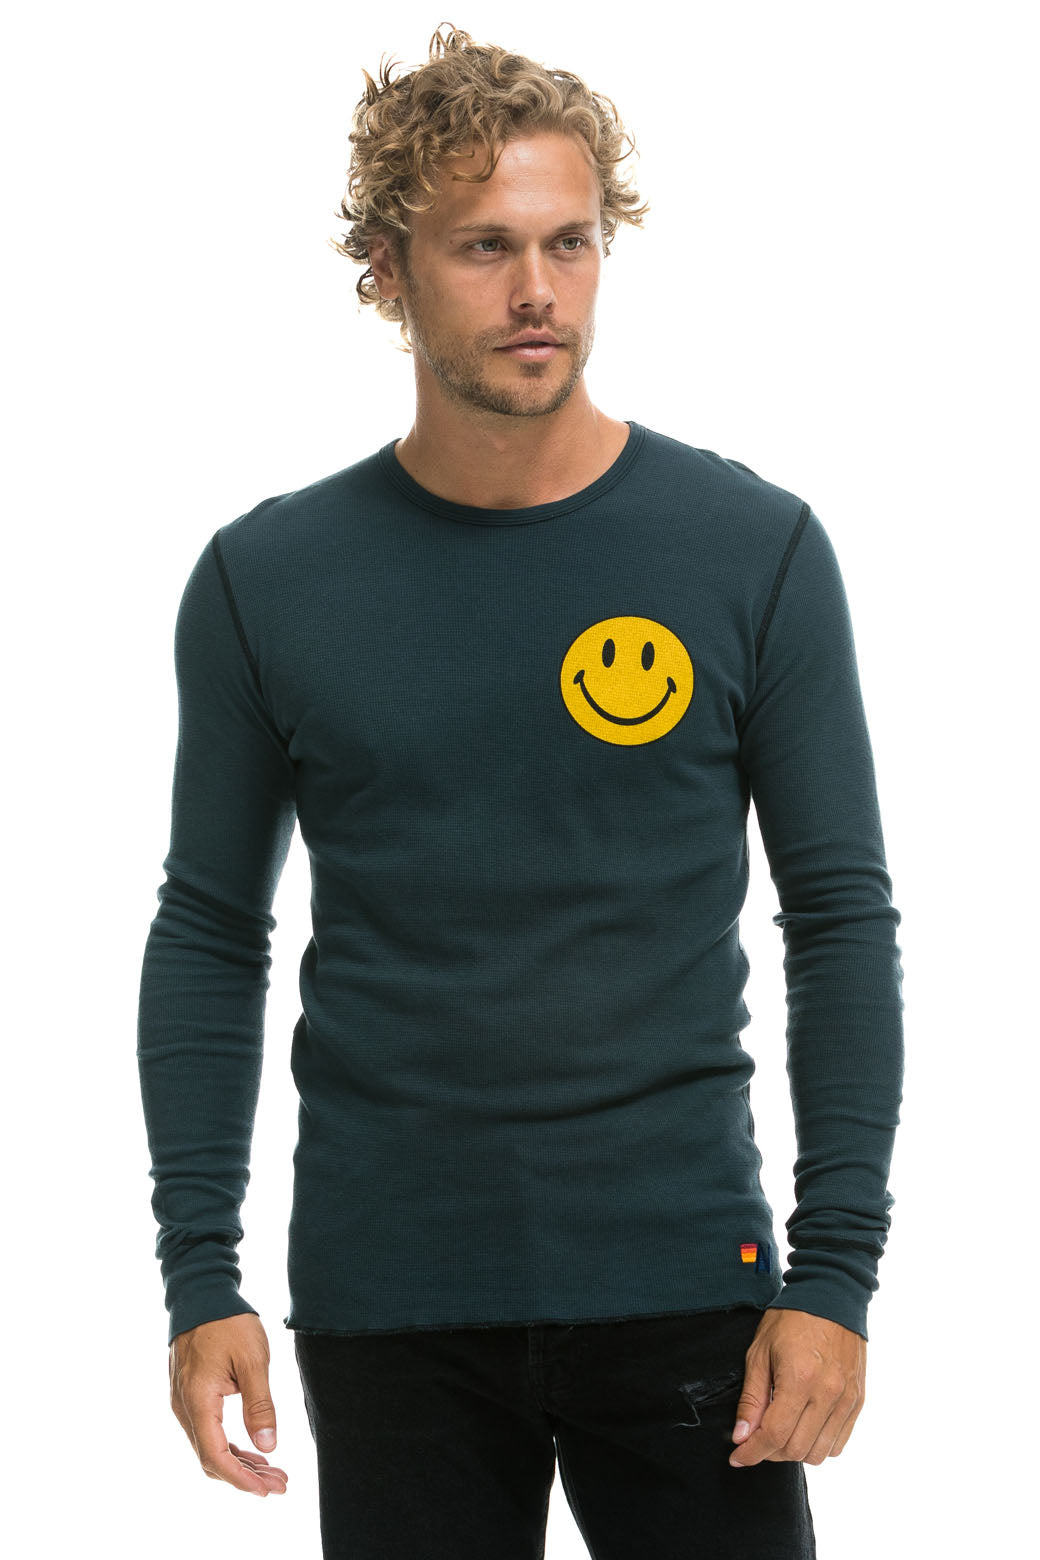 SMILEY 2 THERMAL - CHARCOAL Thermal Aviator Nation 